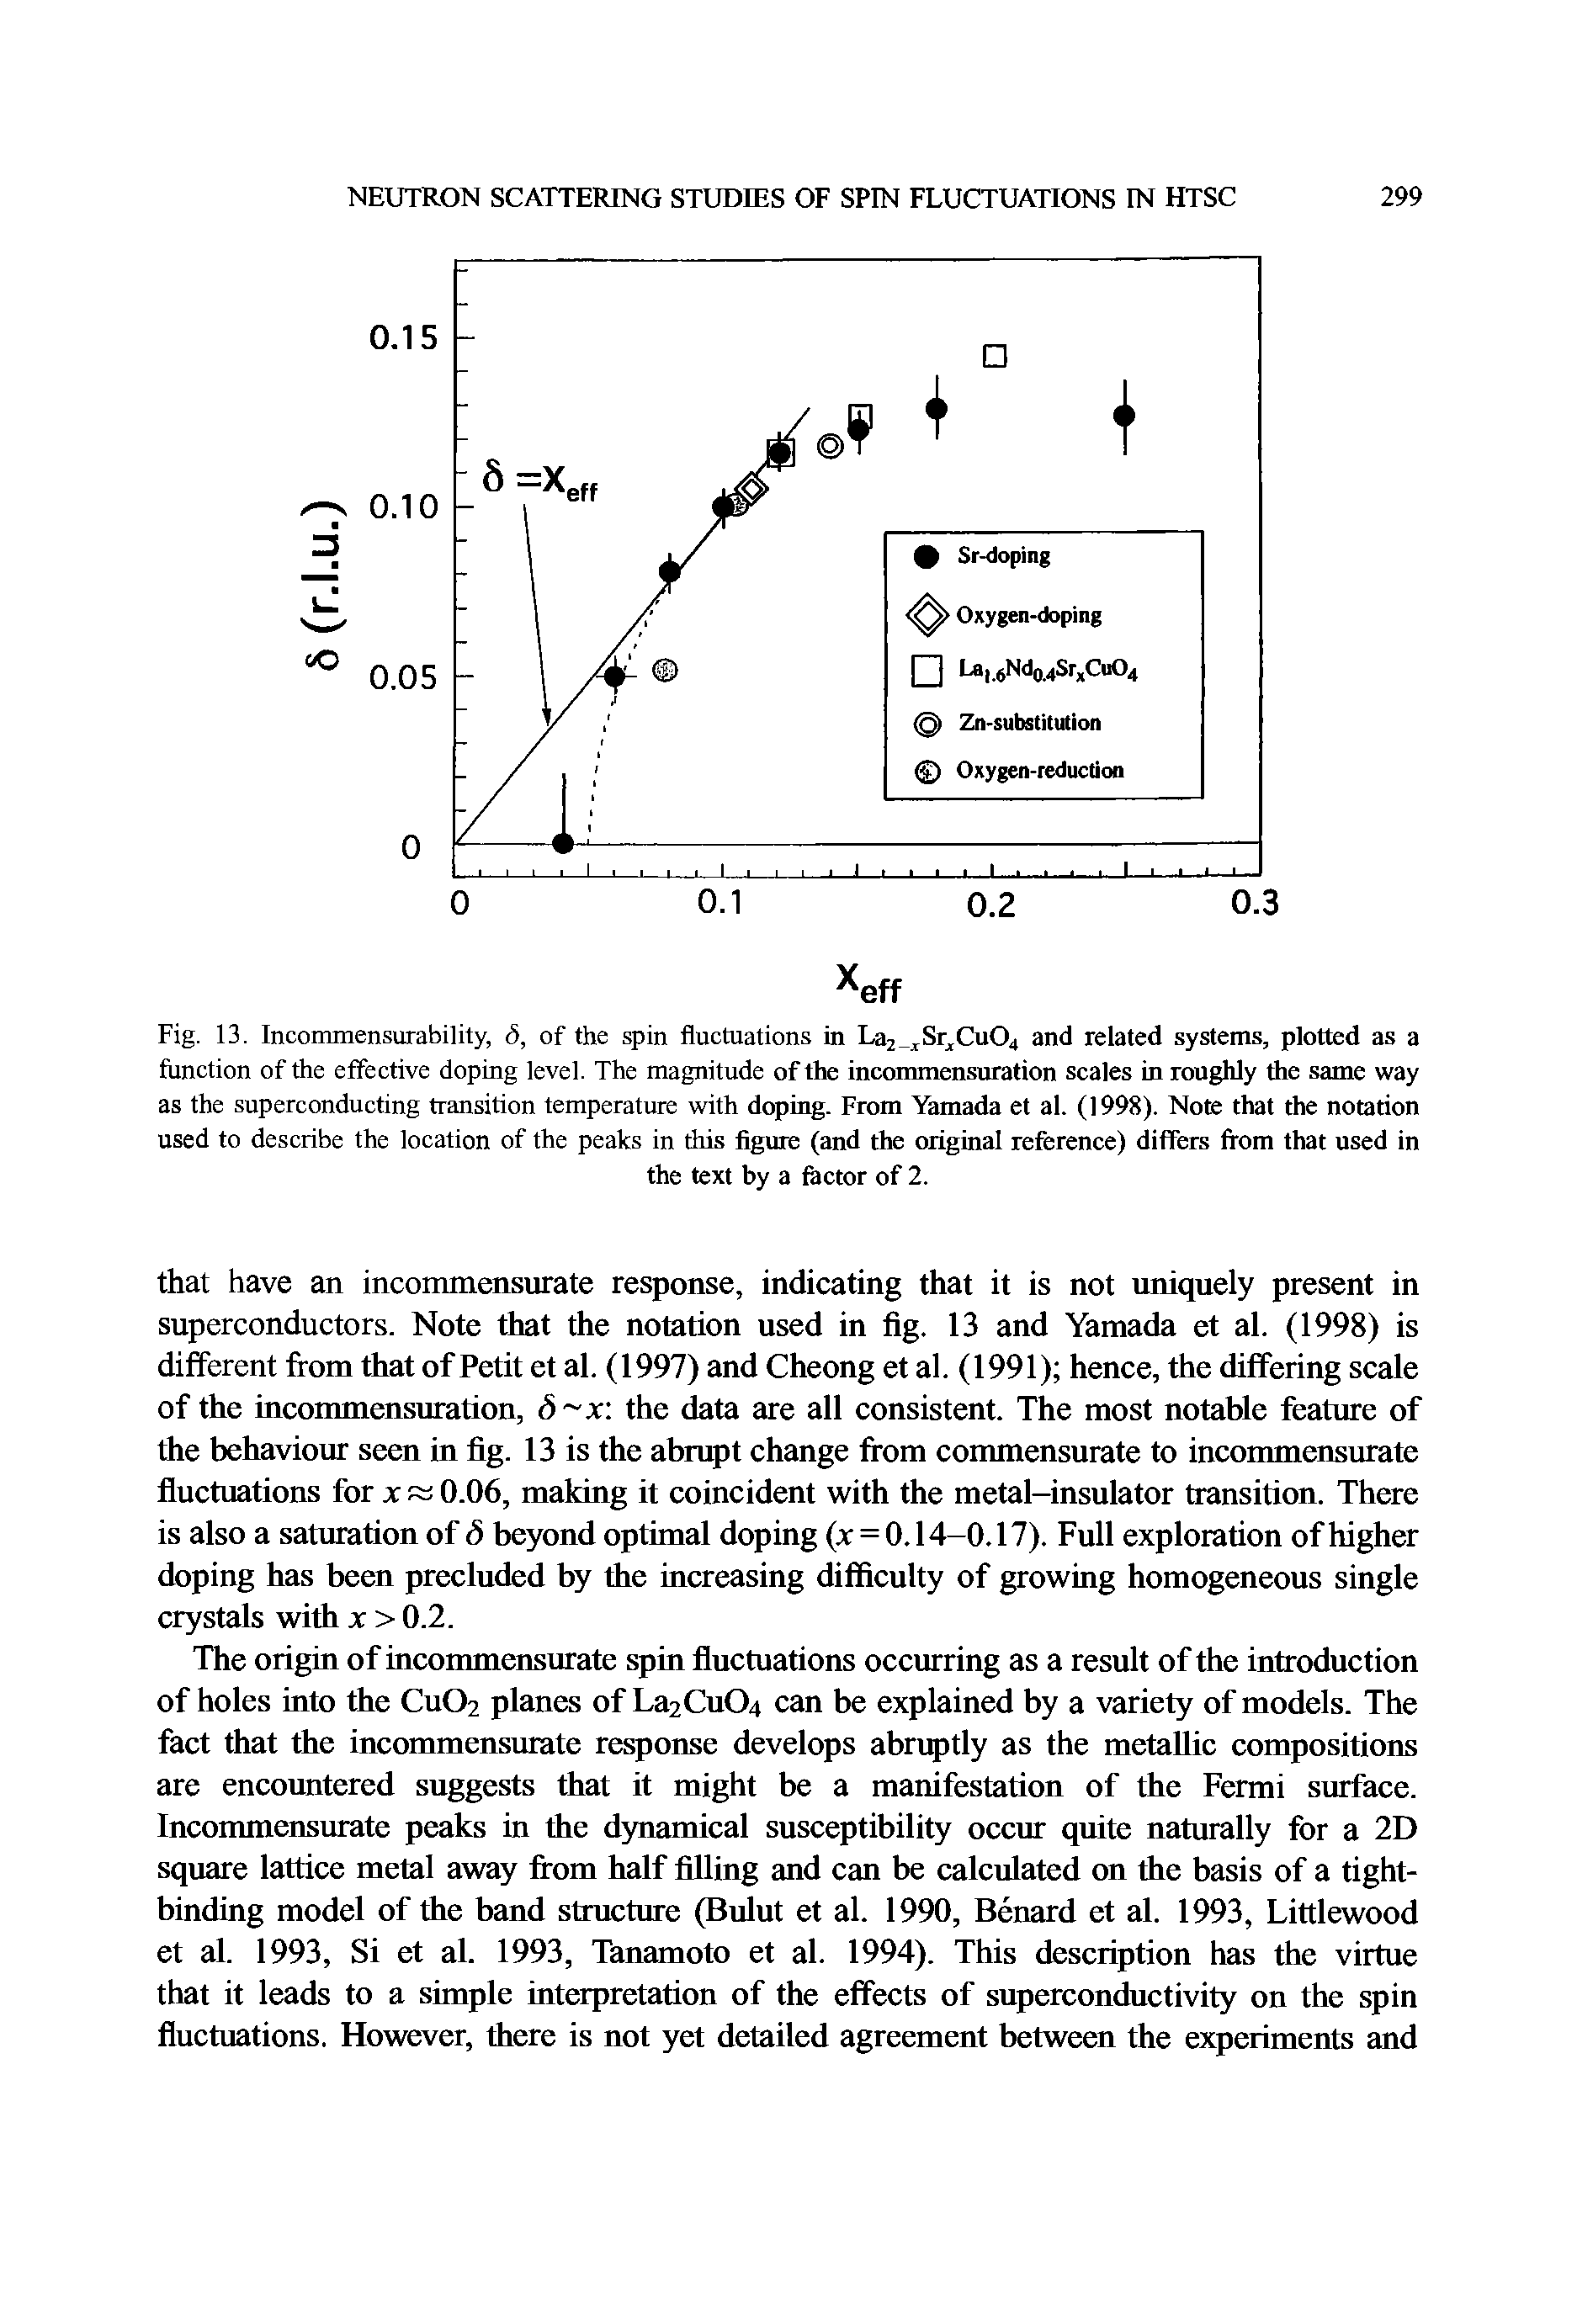 Fig. 13. Incommensurability, d, of the spin fluctuations in La2-.vSr Cu04 and related systems, plotted as a function of the effective doping level. The magnitude of the incommensuration scales in roughly the same way as the superconducting transition temperature with doping. From Yamada et al. (1998). Note that the notation used to describe the location of the peaks in this figure (and the original reference) differs Ifom that used in...